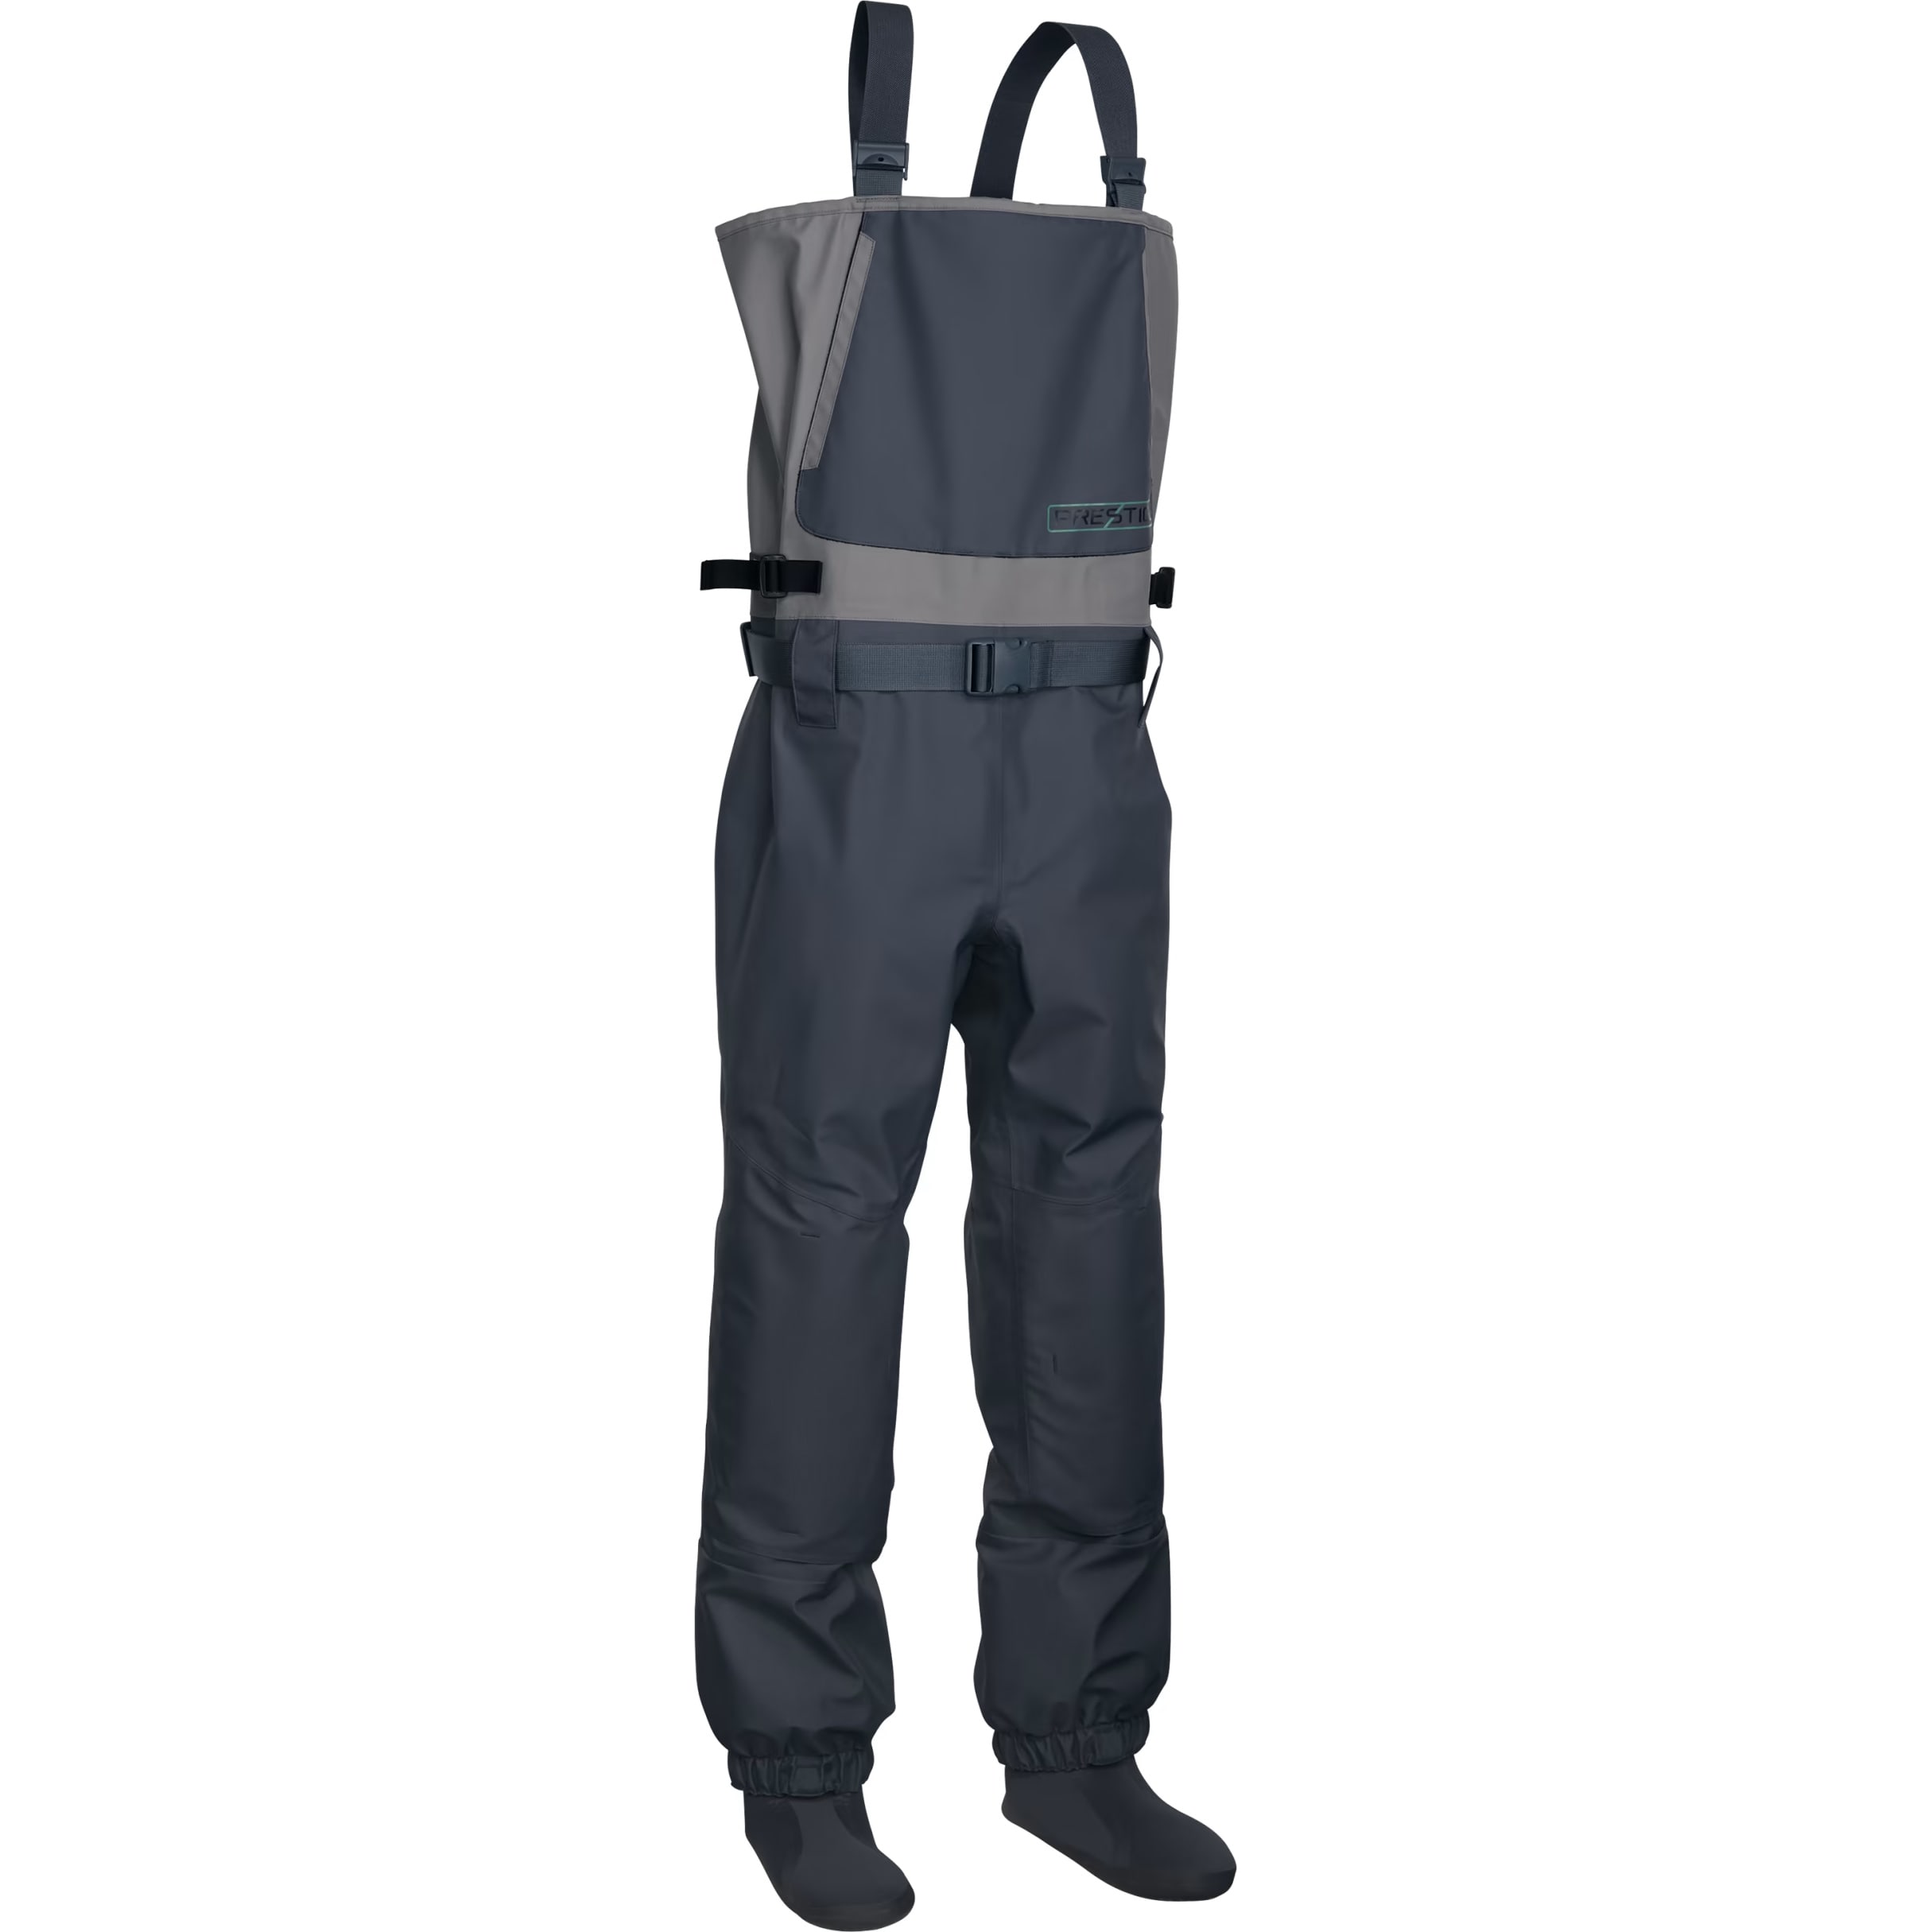 White River Fly Shop® Women's Prestige Stocking-Foot Chest Waders